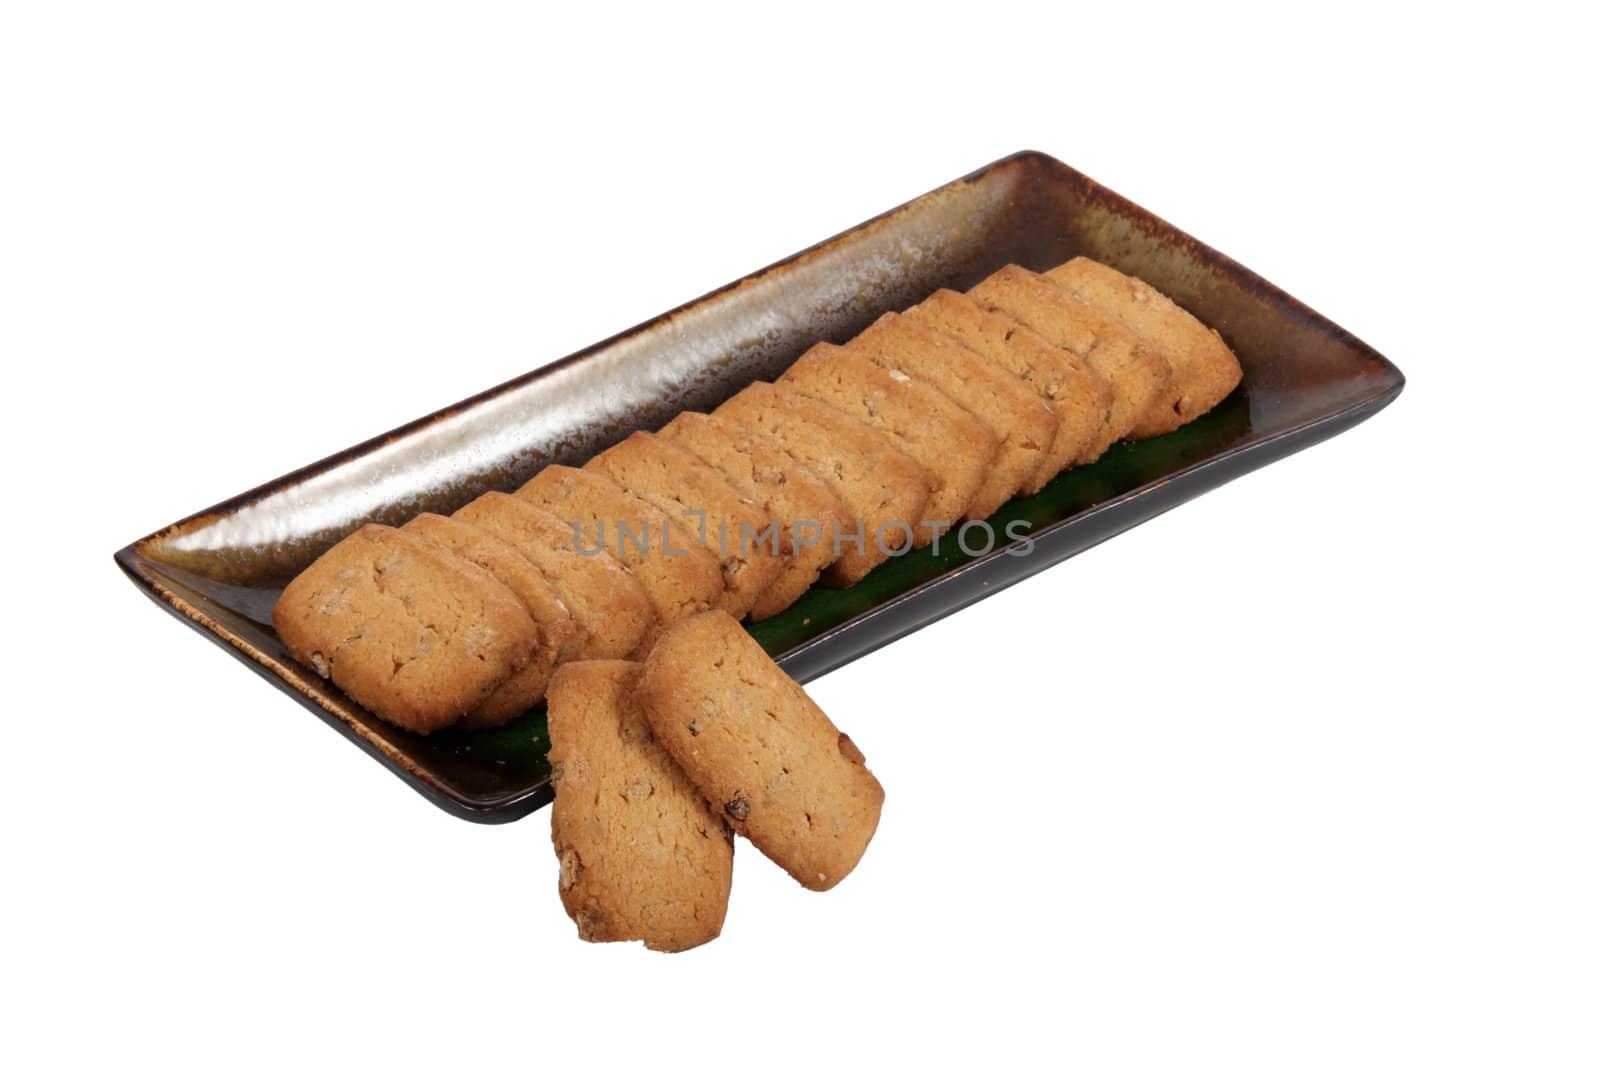 Tray of biscuits by phovoir